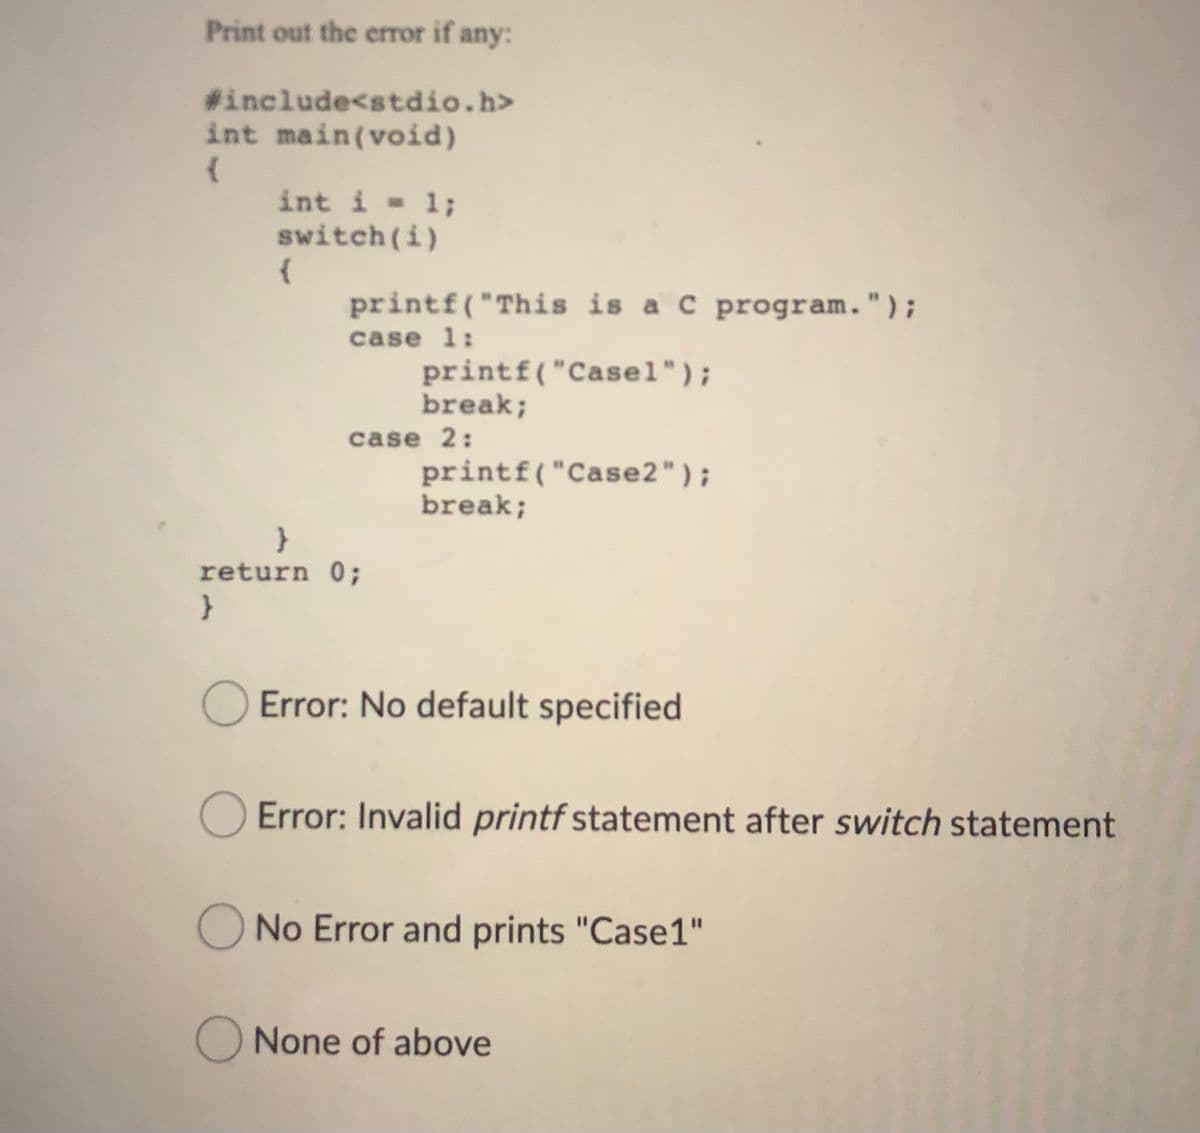 Print out the error if any:
#include<stdio.h>
int main(void)
int i - 1;
switch(i)
{
printf( "This is a C program.");
case 1:
printf("Casel");
break;
case 2:
printf("Case2");
break;
return 0;
}
O Error: No default specified
O Error: Invalid printf statement after switch statement
ONo Error and prints "Case1"
None of above
